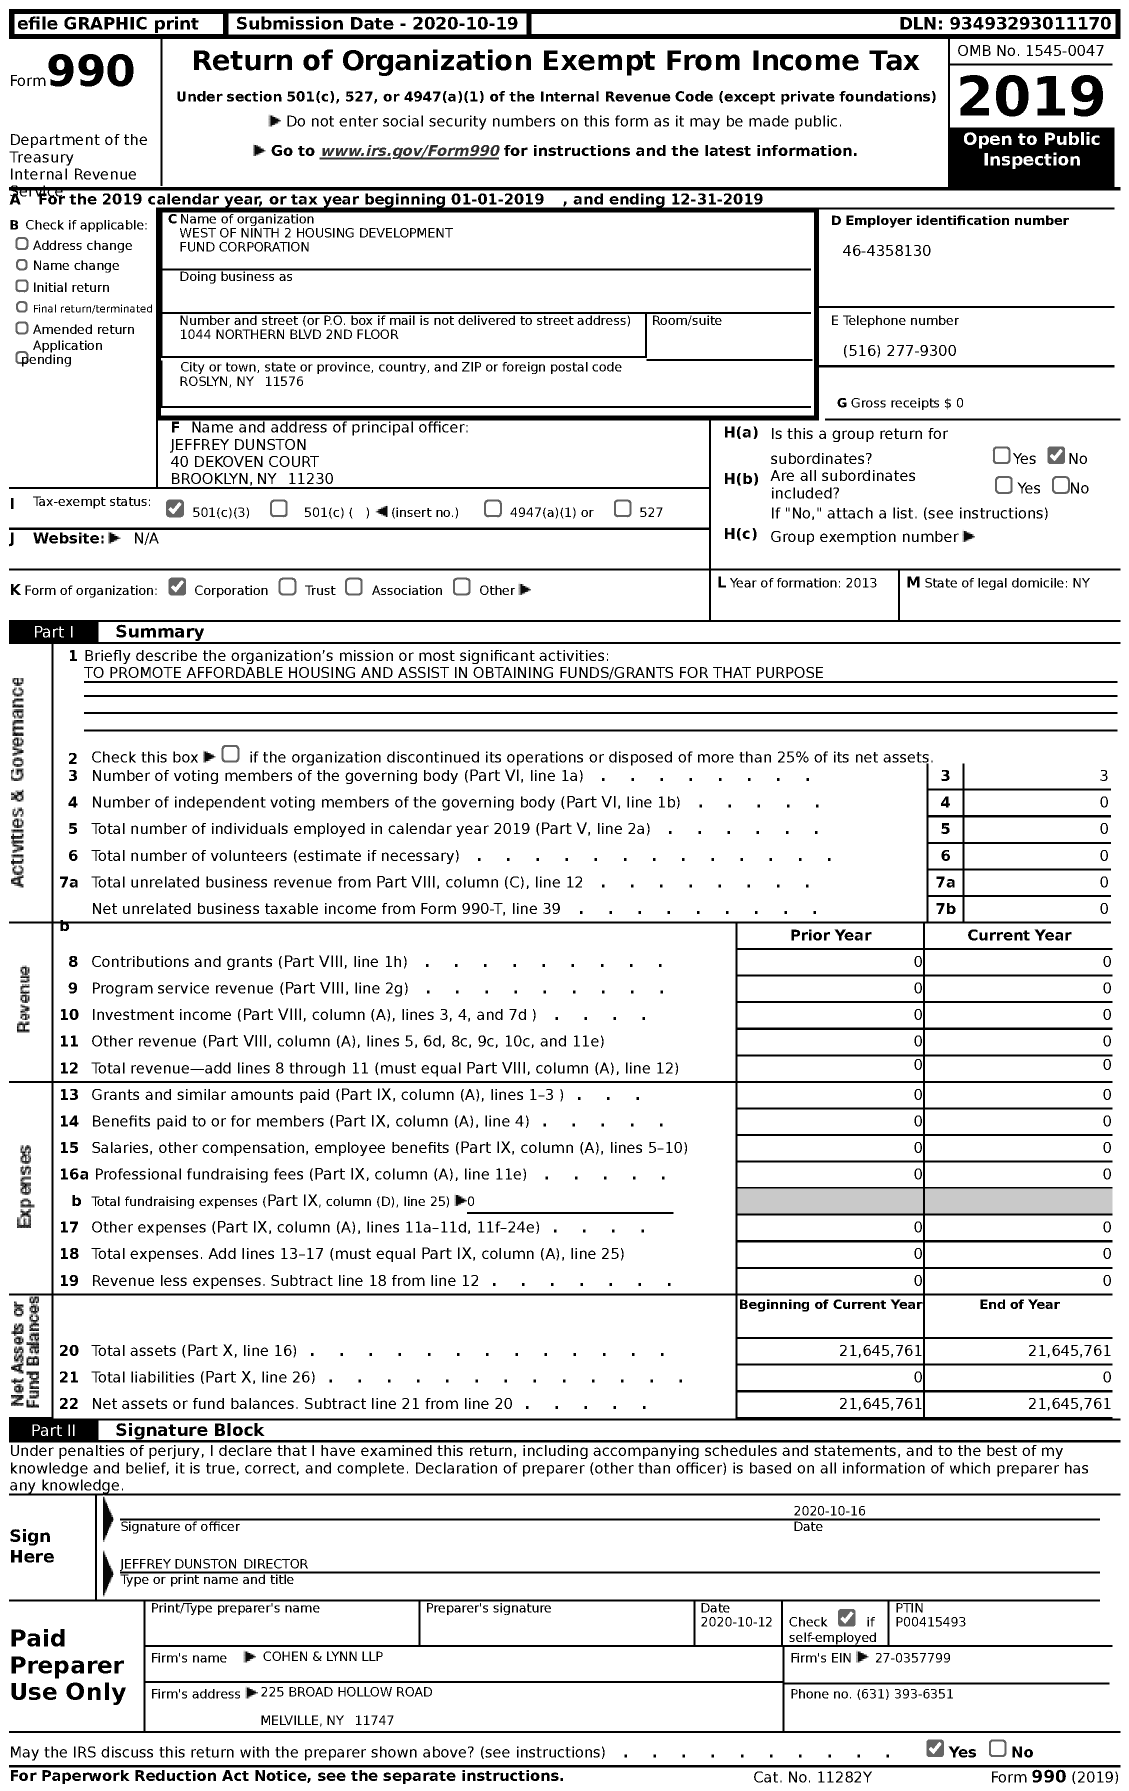 Image of first page of 2019 Form 990 for West of Ninth 2 Housing Development Fund Corporation